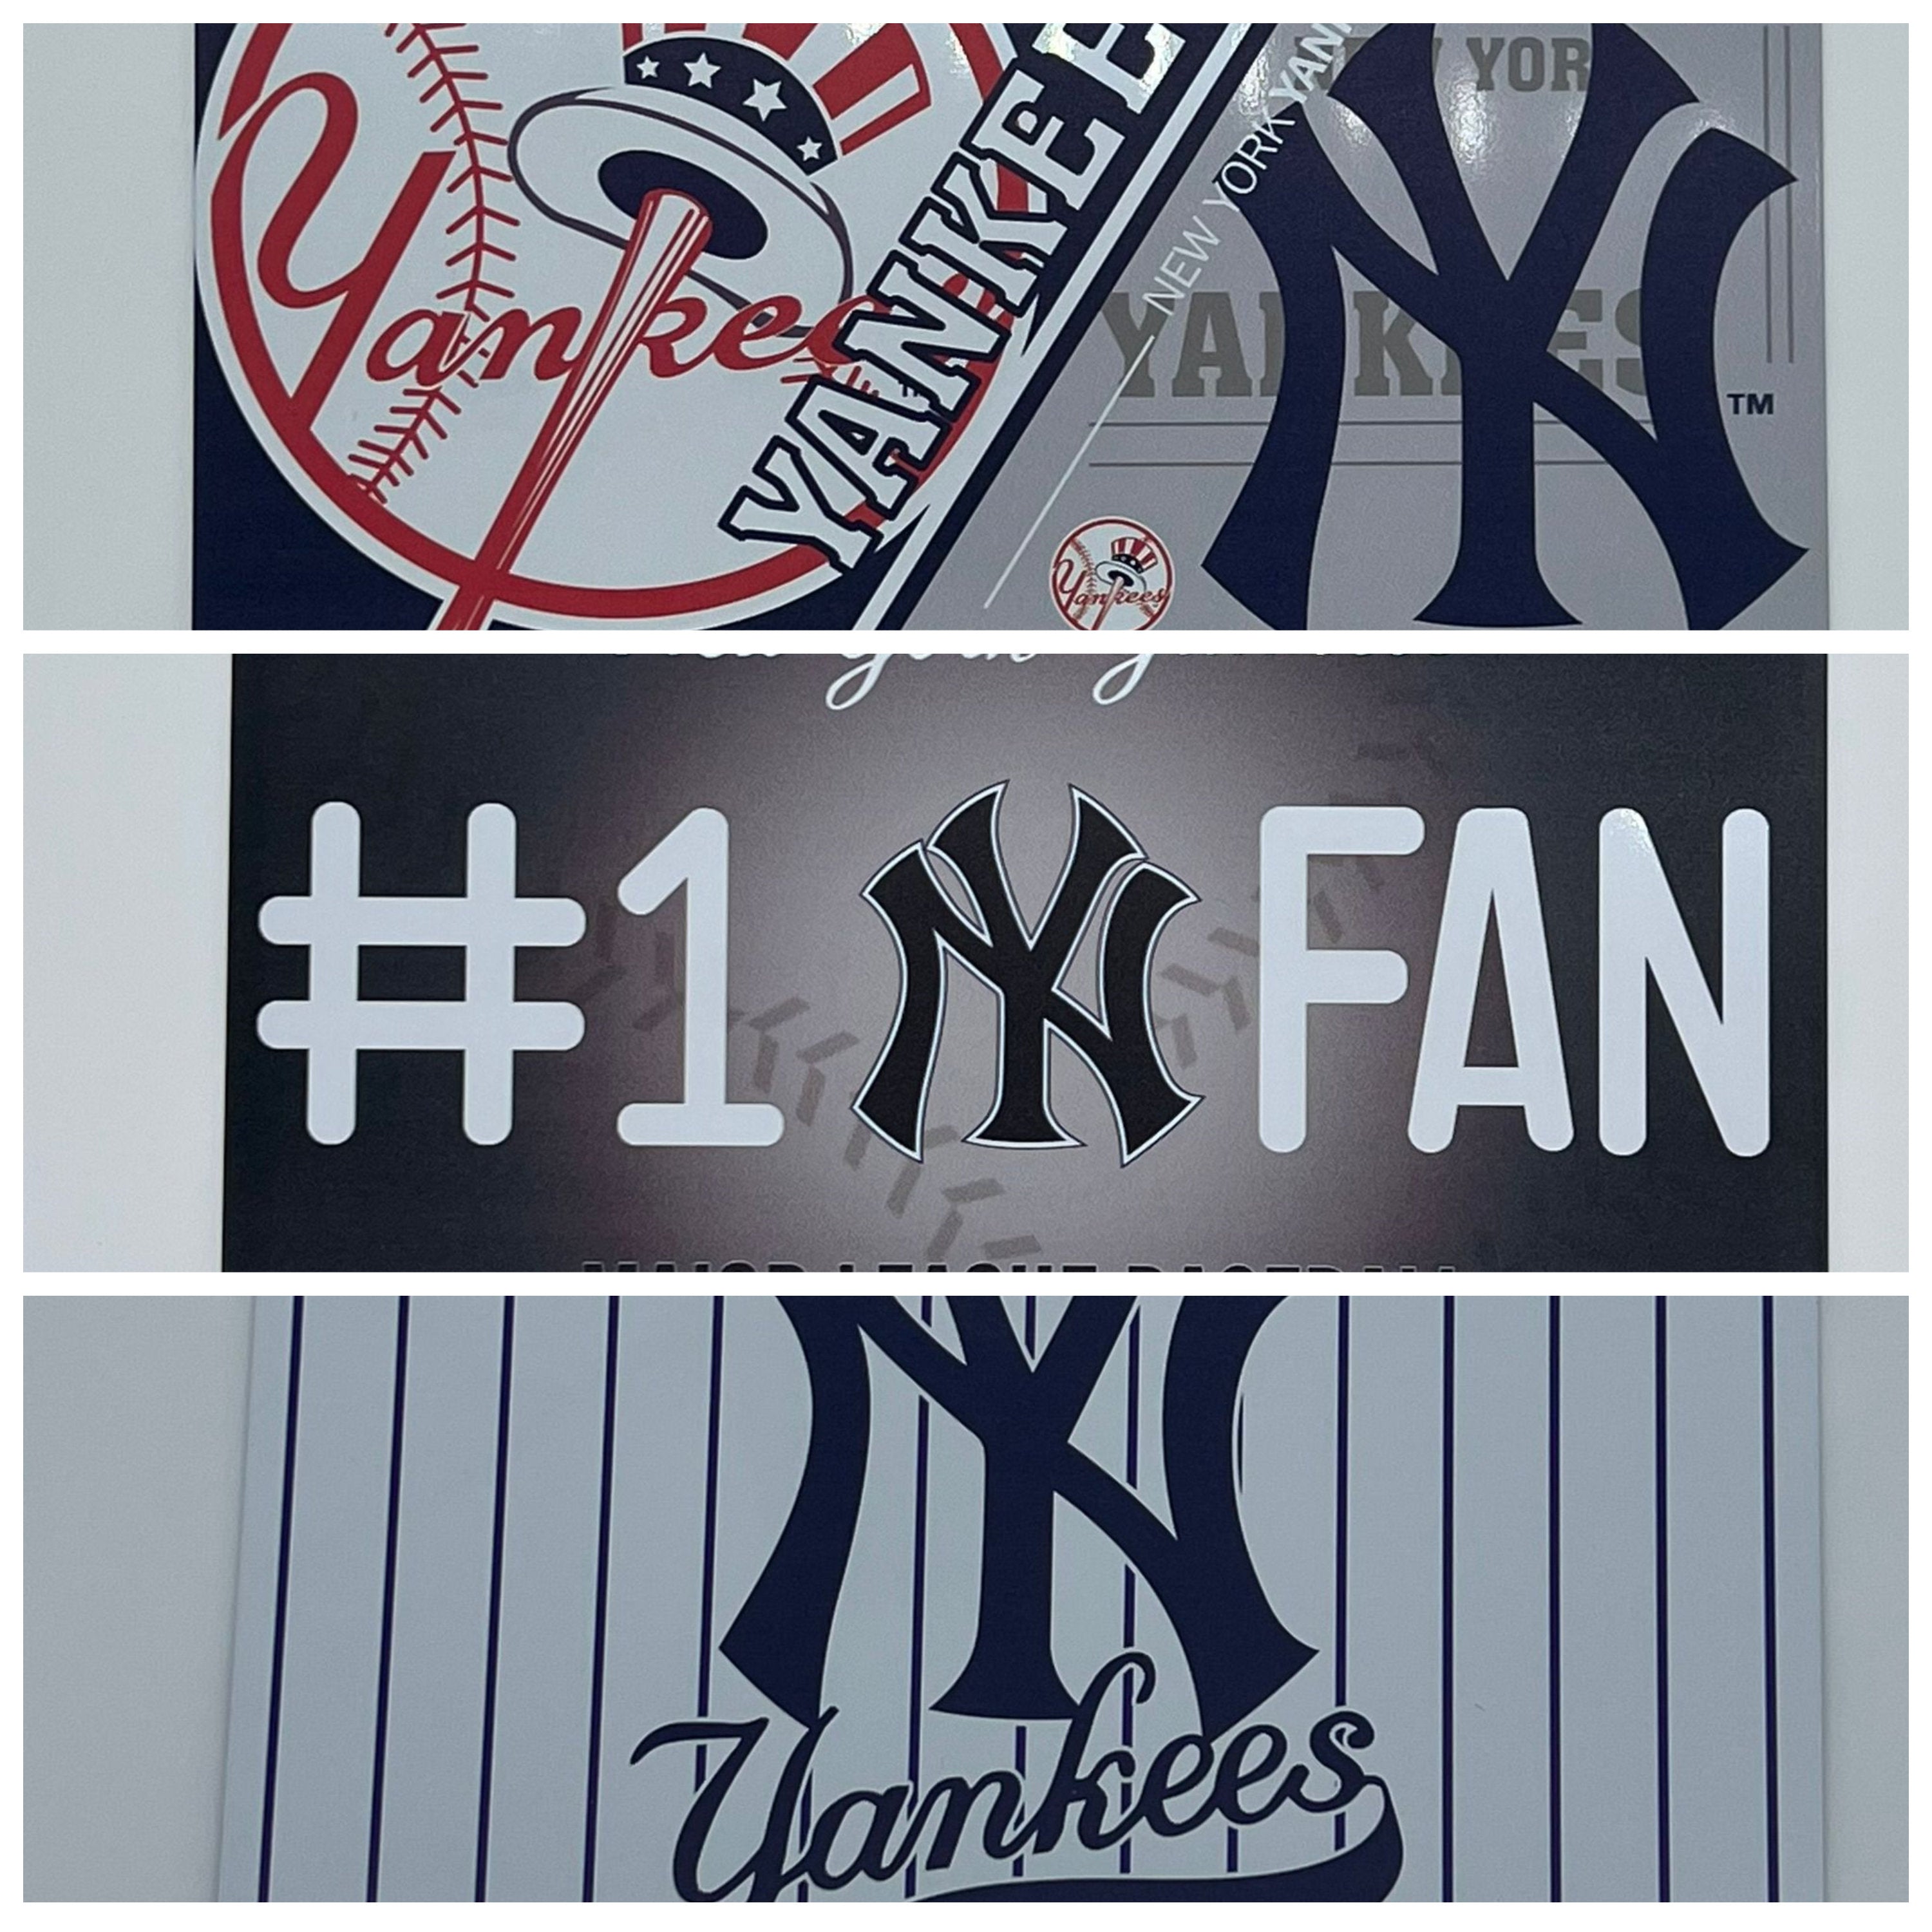 New York Yankees NY Baseball USA metal plate license plate Vintage gift sports displays arts and crafts projects honkbal ball license plate - Stripes